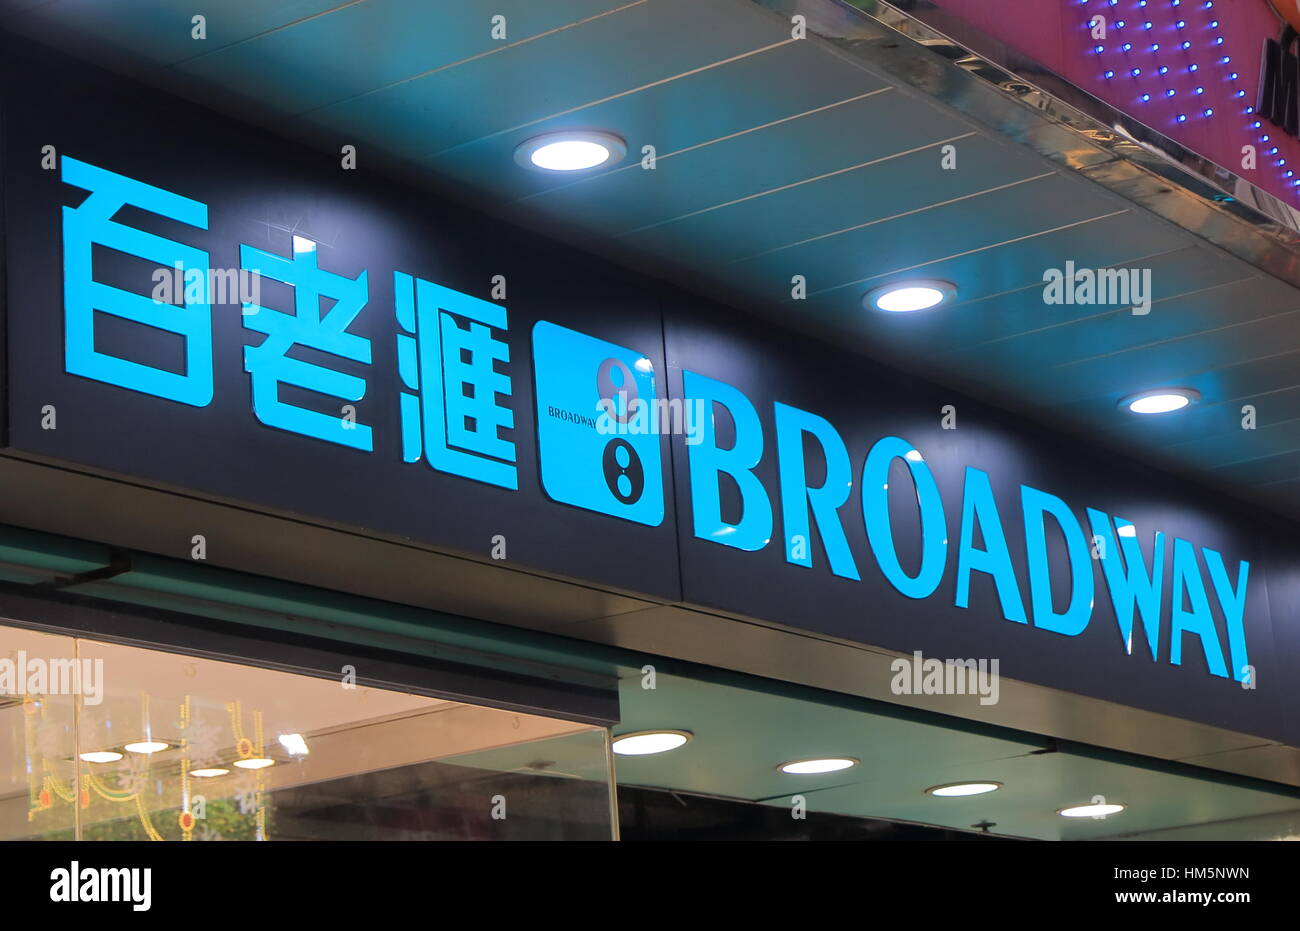 Broadway store in Mong Kok in Hong Kong. Broadway is one of the largest electrical appliances retail chain stores in Hong Kong. Stock Photo